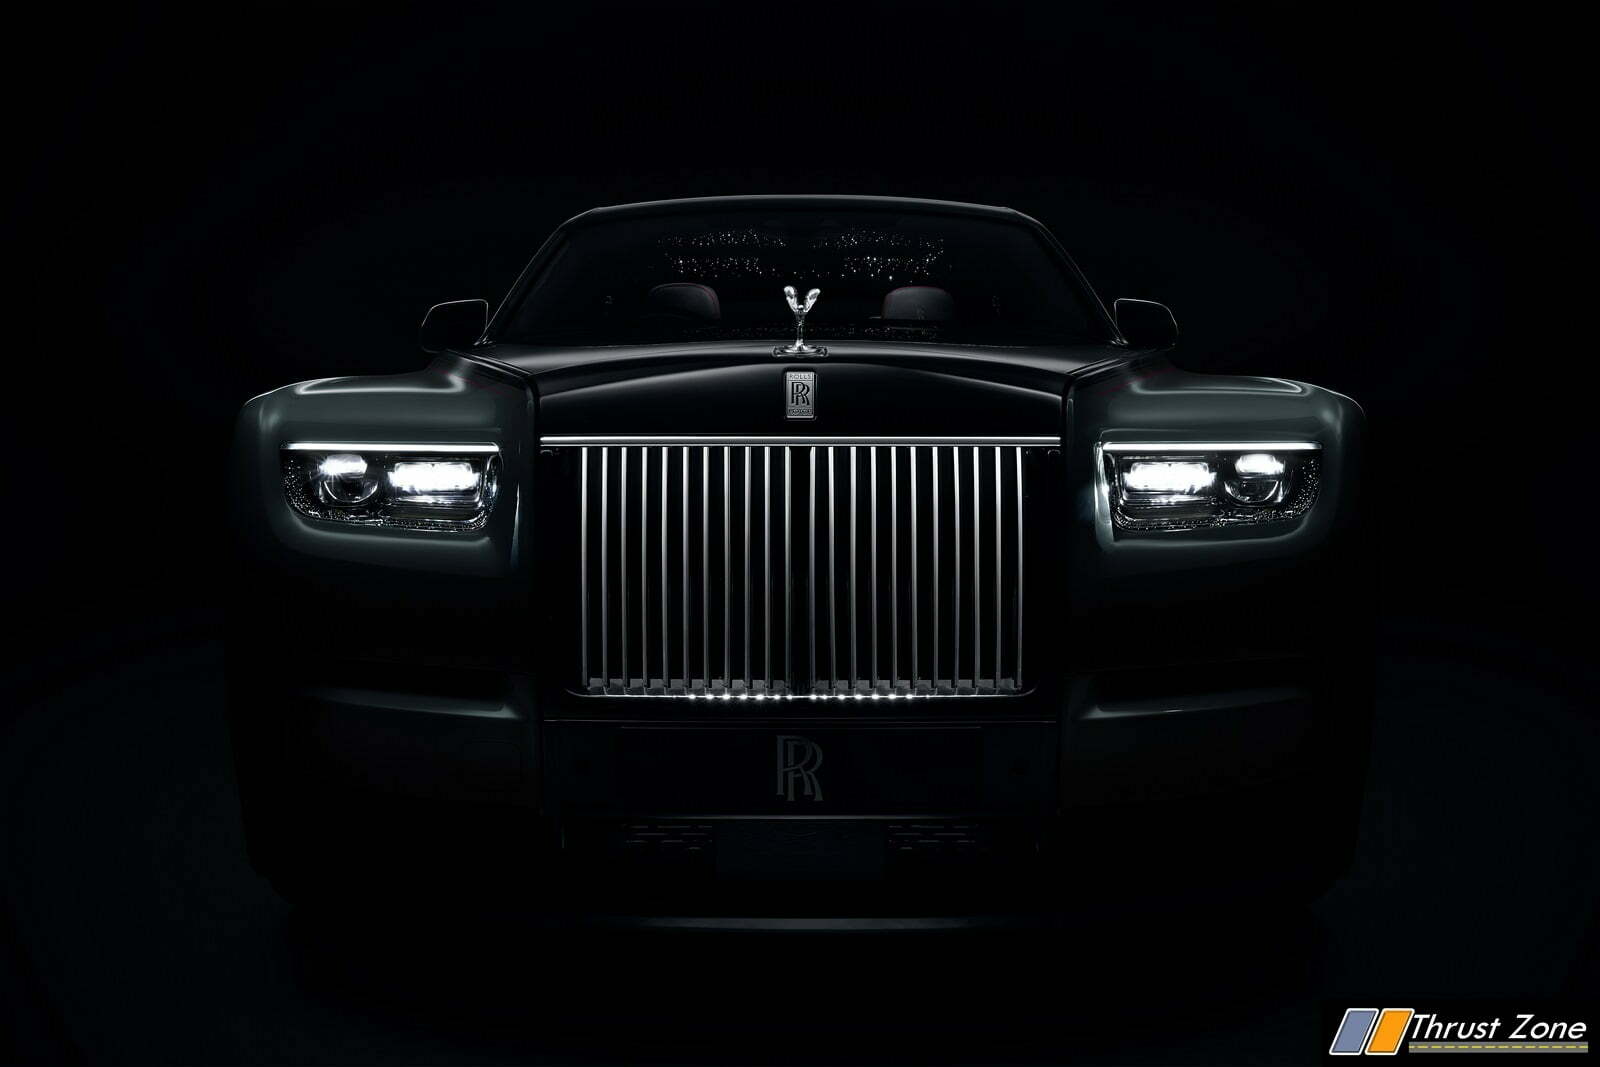 2022 Rolls Royce Phantom Updated Inside and Outside With Subtle Changes (4)